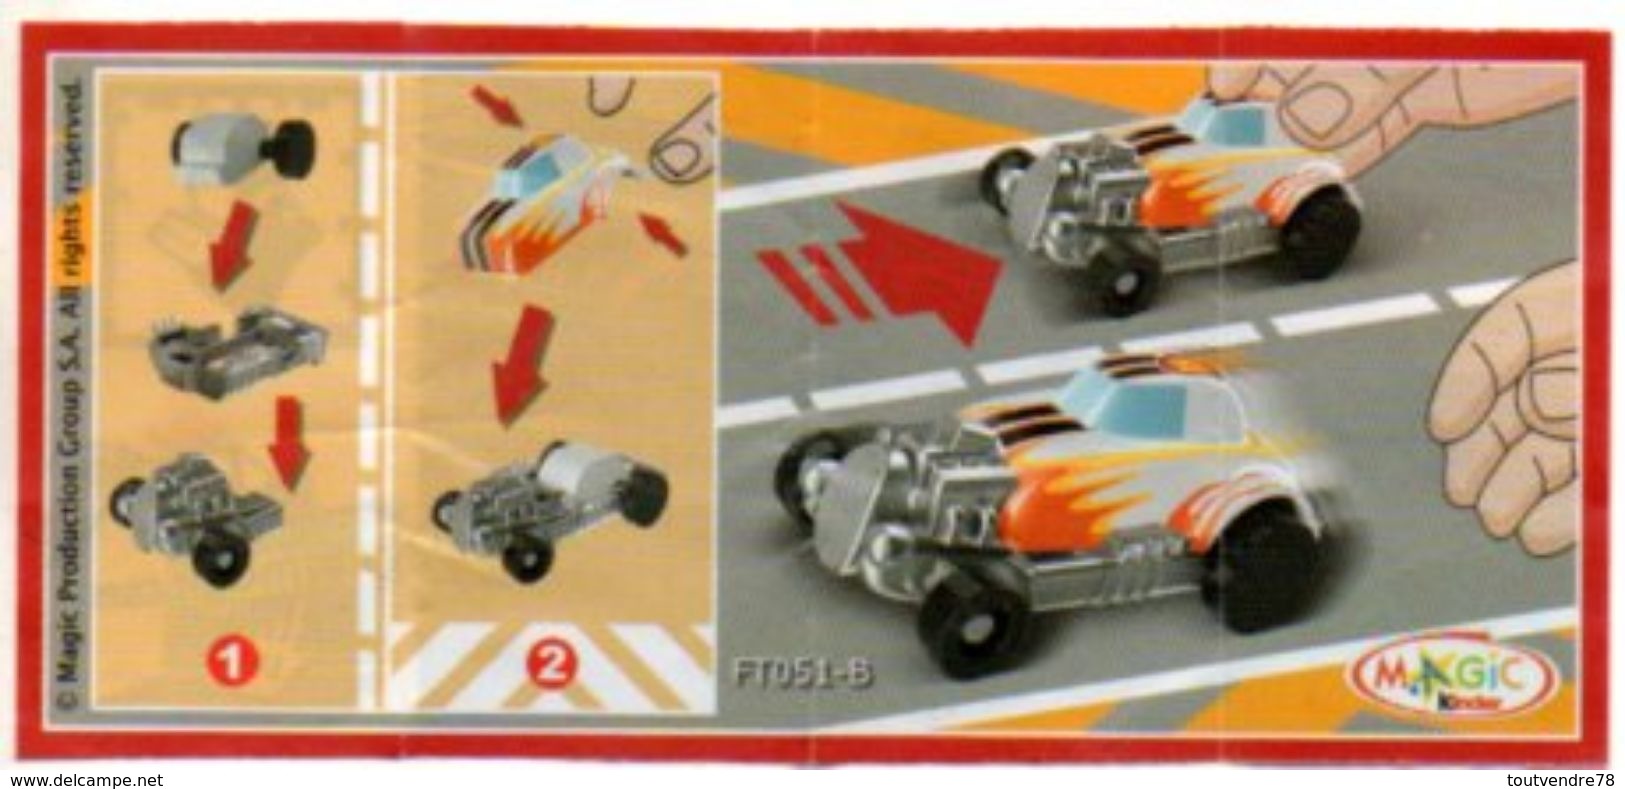 BPZ128 France Ref : FT051B Voitures Hot Rod / Hot Rod Blanc N°62 - Notices